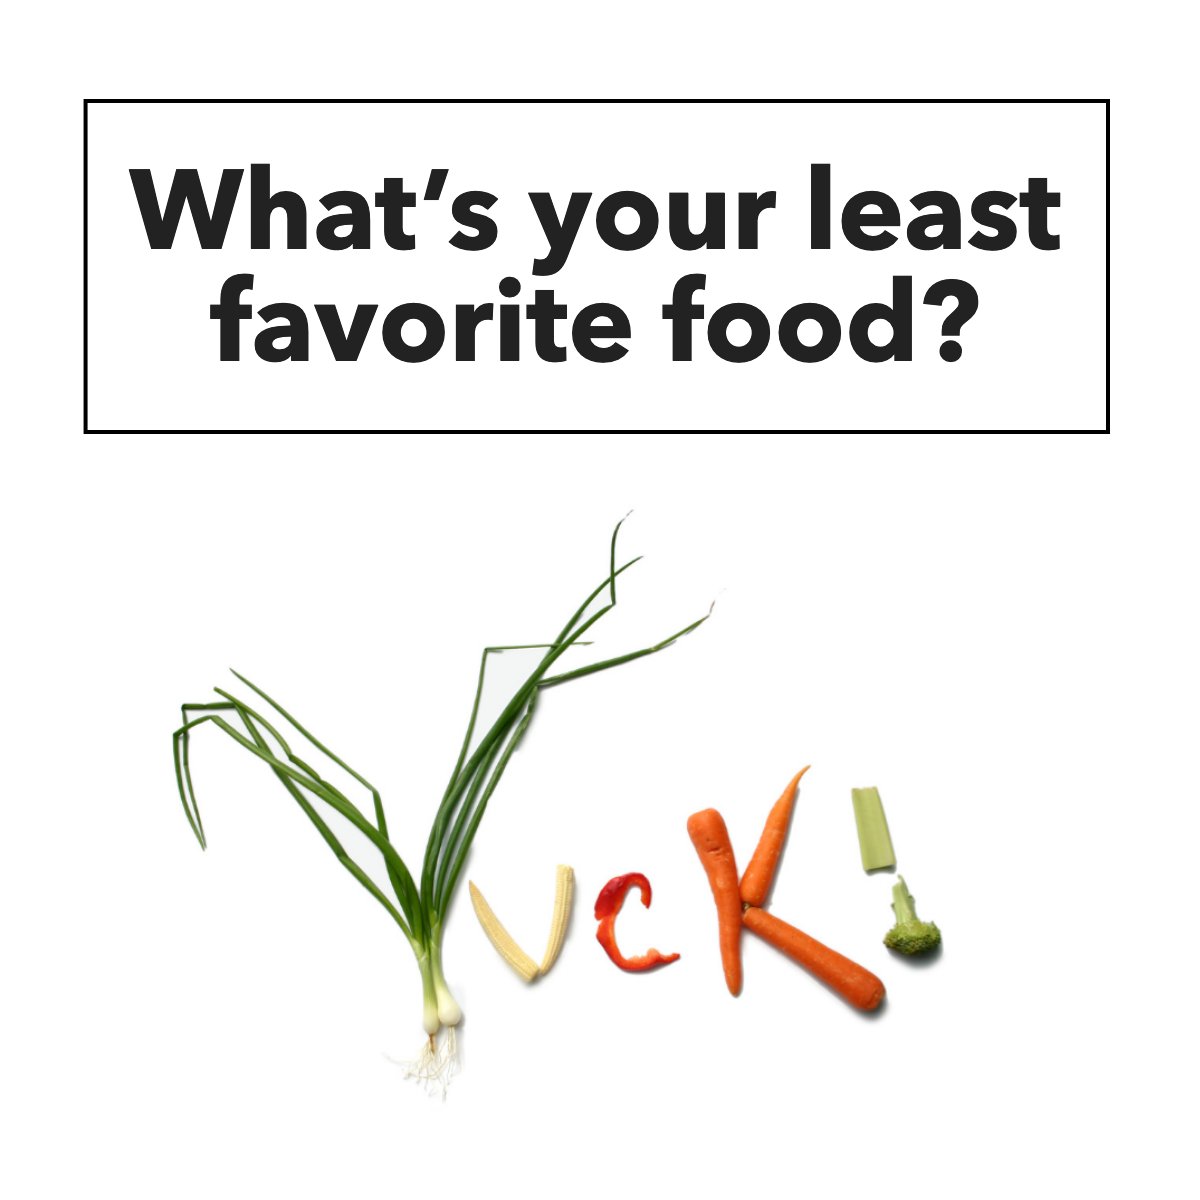 I get you, I can't stand the taste either.

What's your least favorite food? 🤢

#yuck    #ewww    #foodidontlike    #foodlover    #moodfood
#YourPerfectHome #CRayBrower #SanJoaquinCounty #StocktonCA #RealEstate